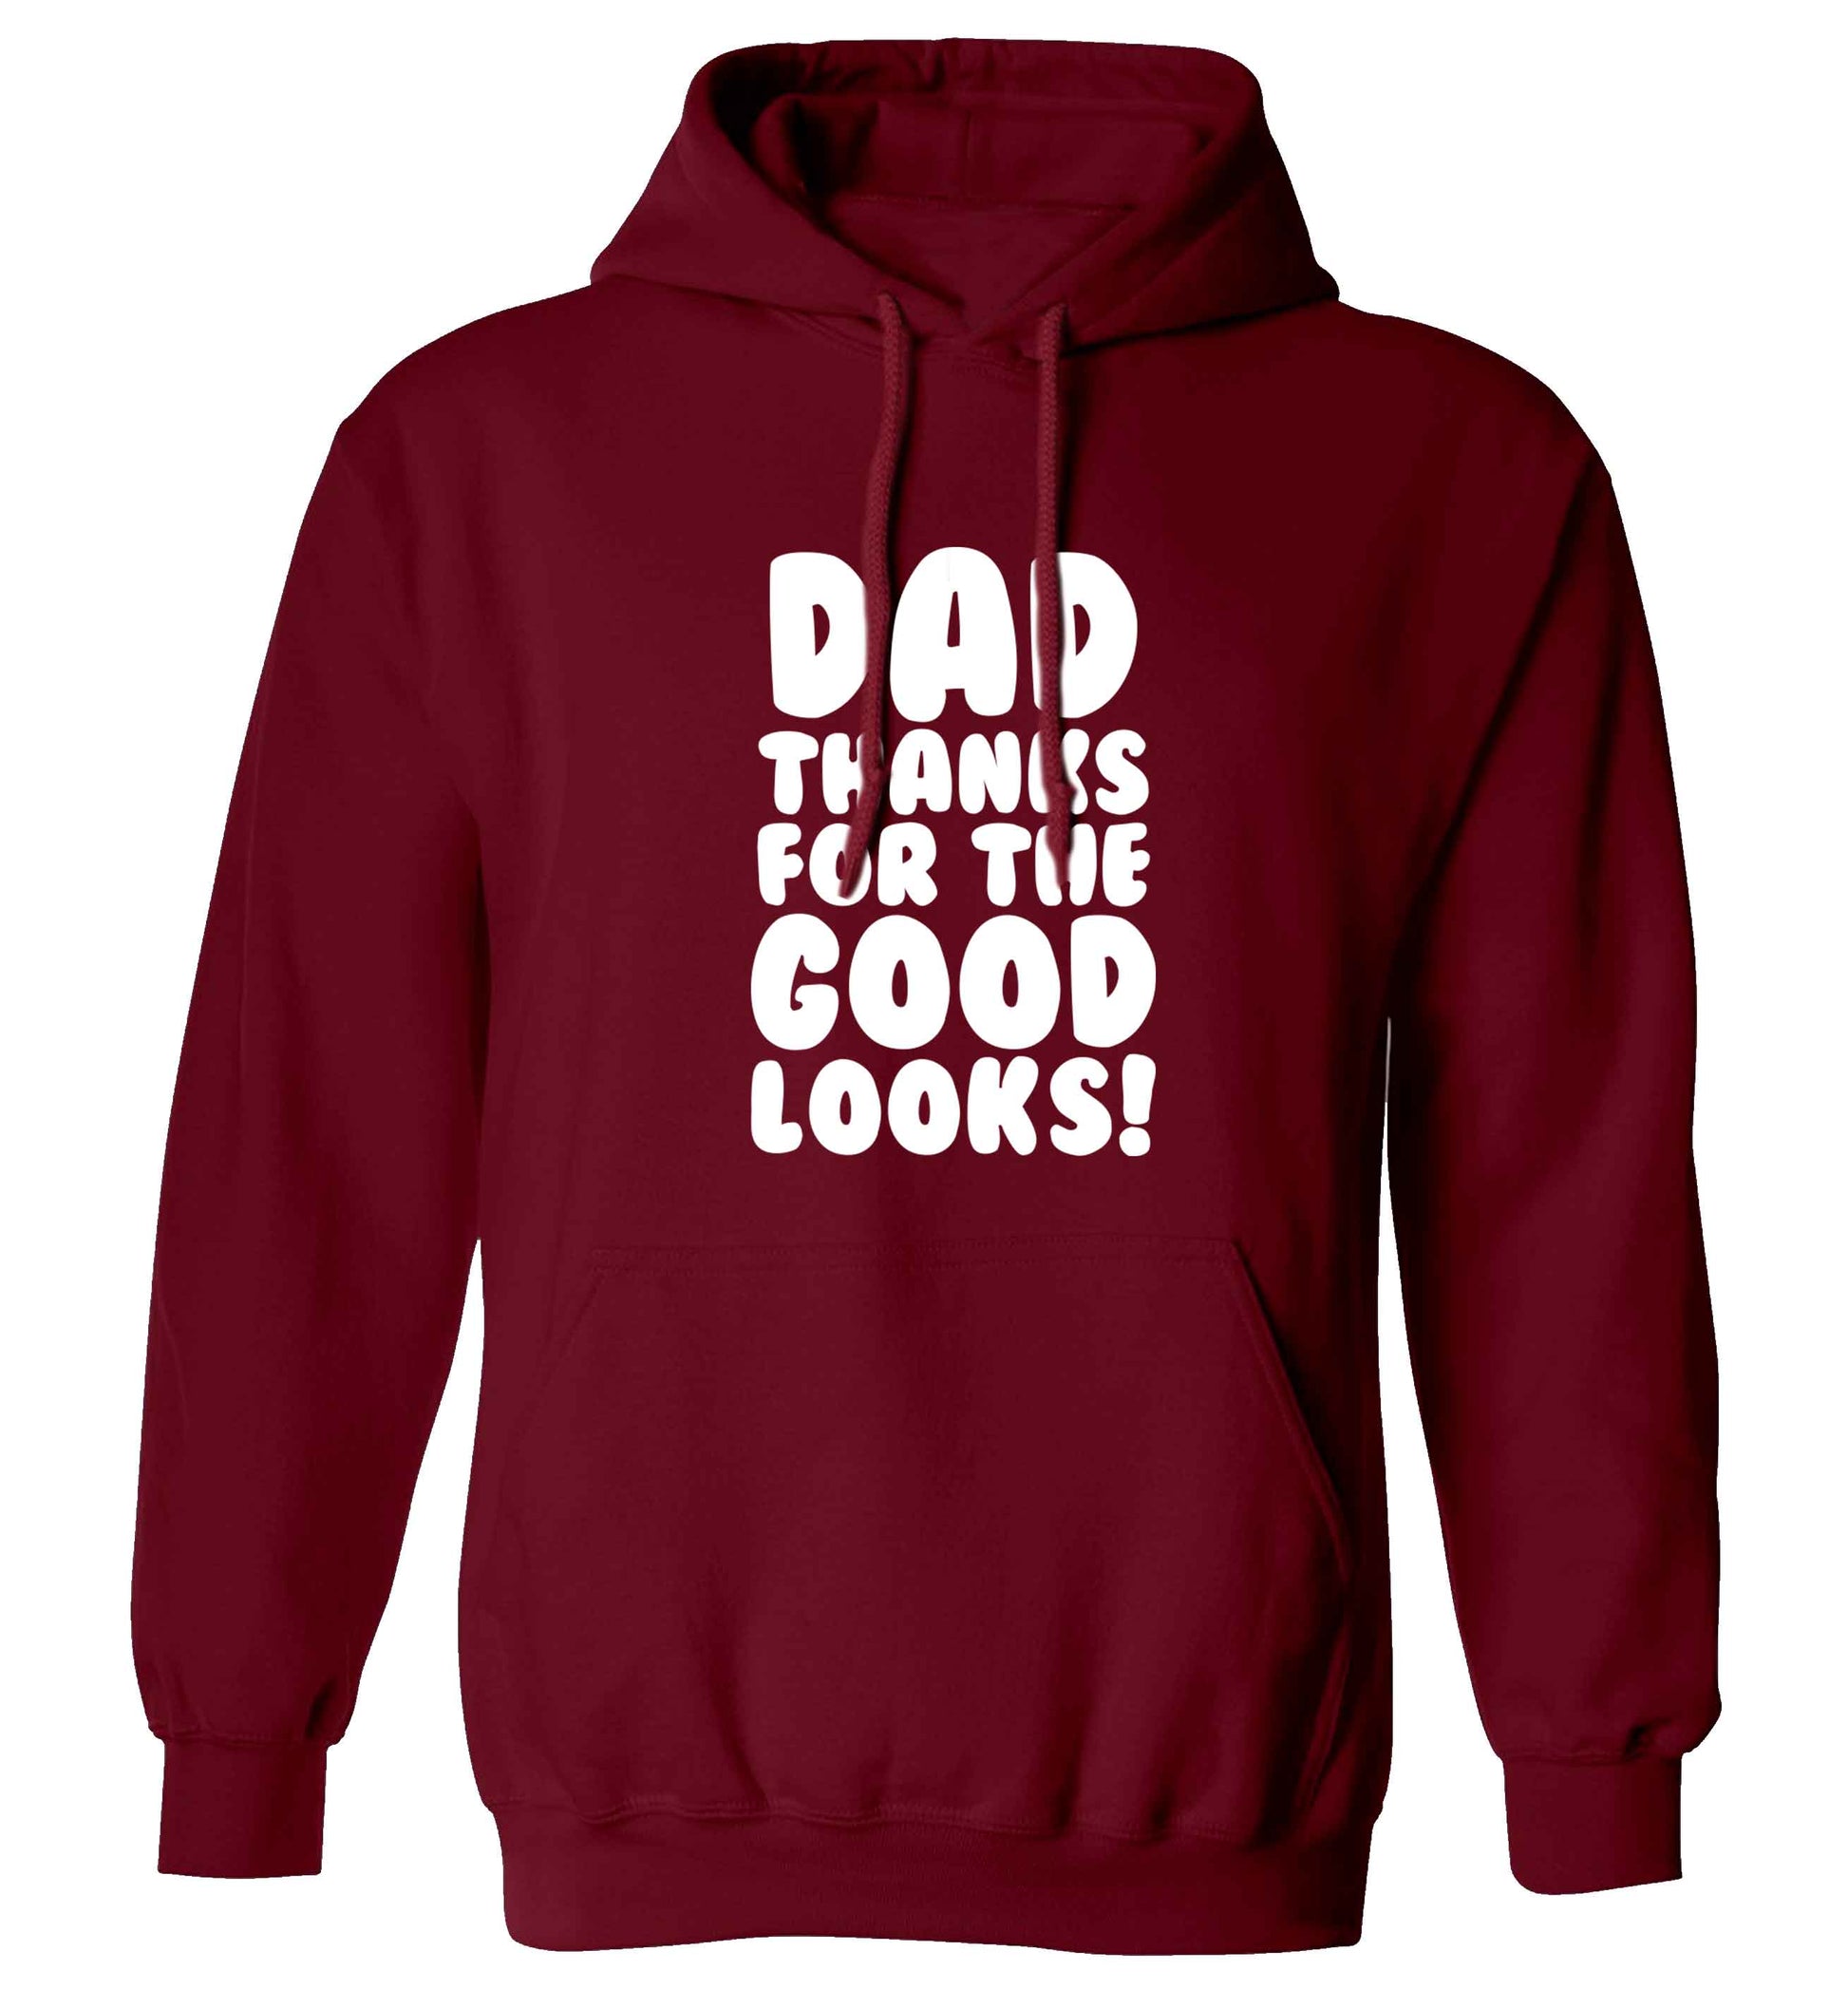 Dad thanks for the good looks adults unisex maroon hoodie 2XL